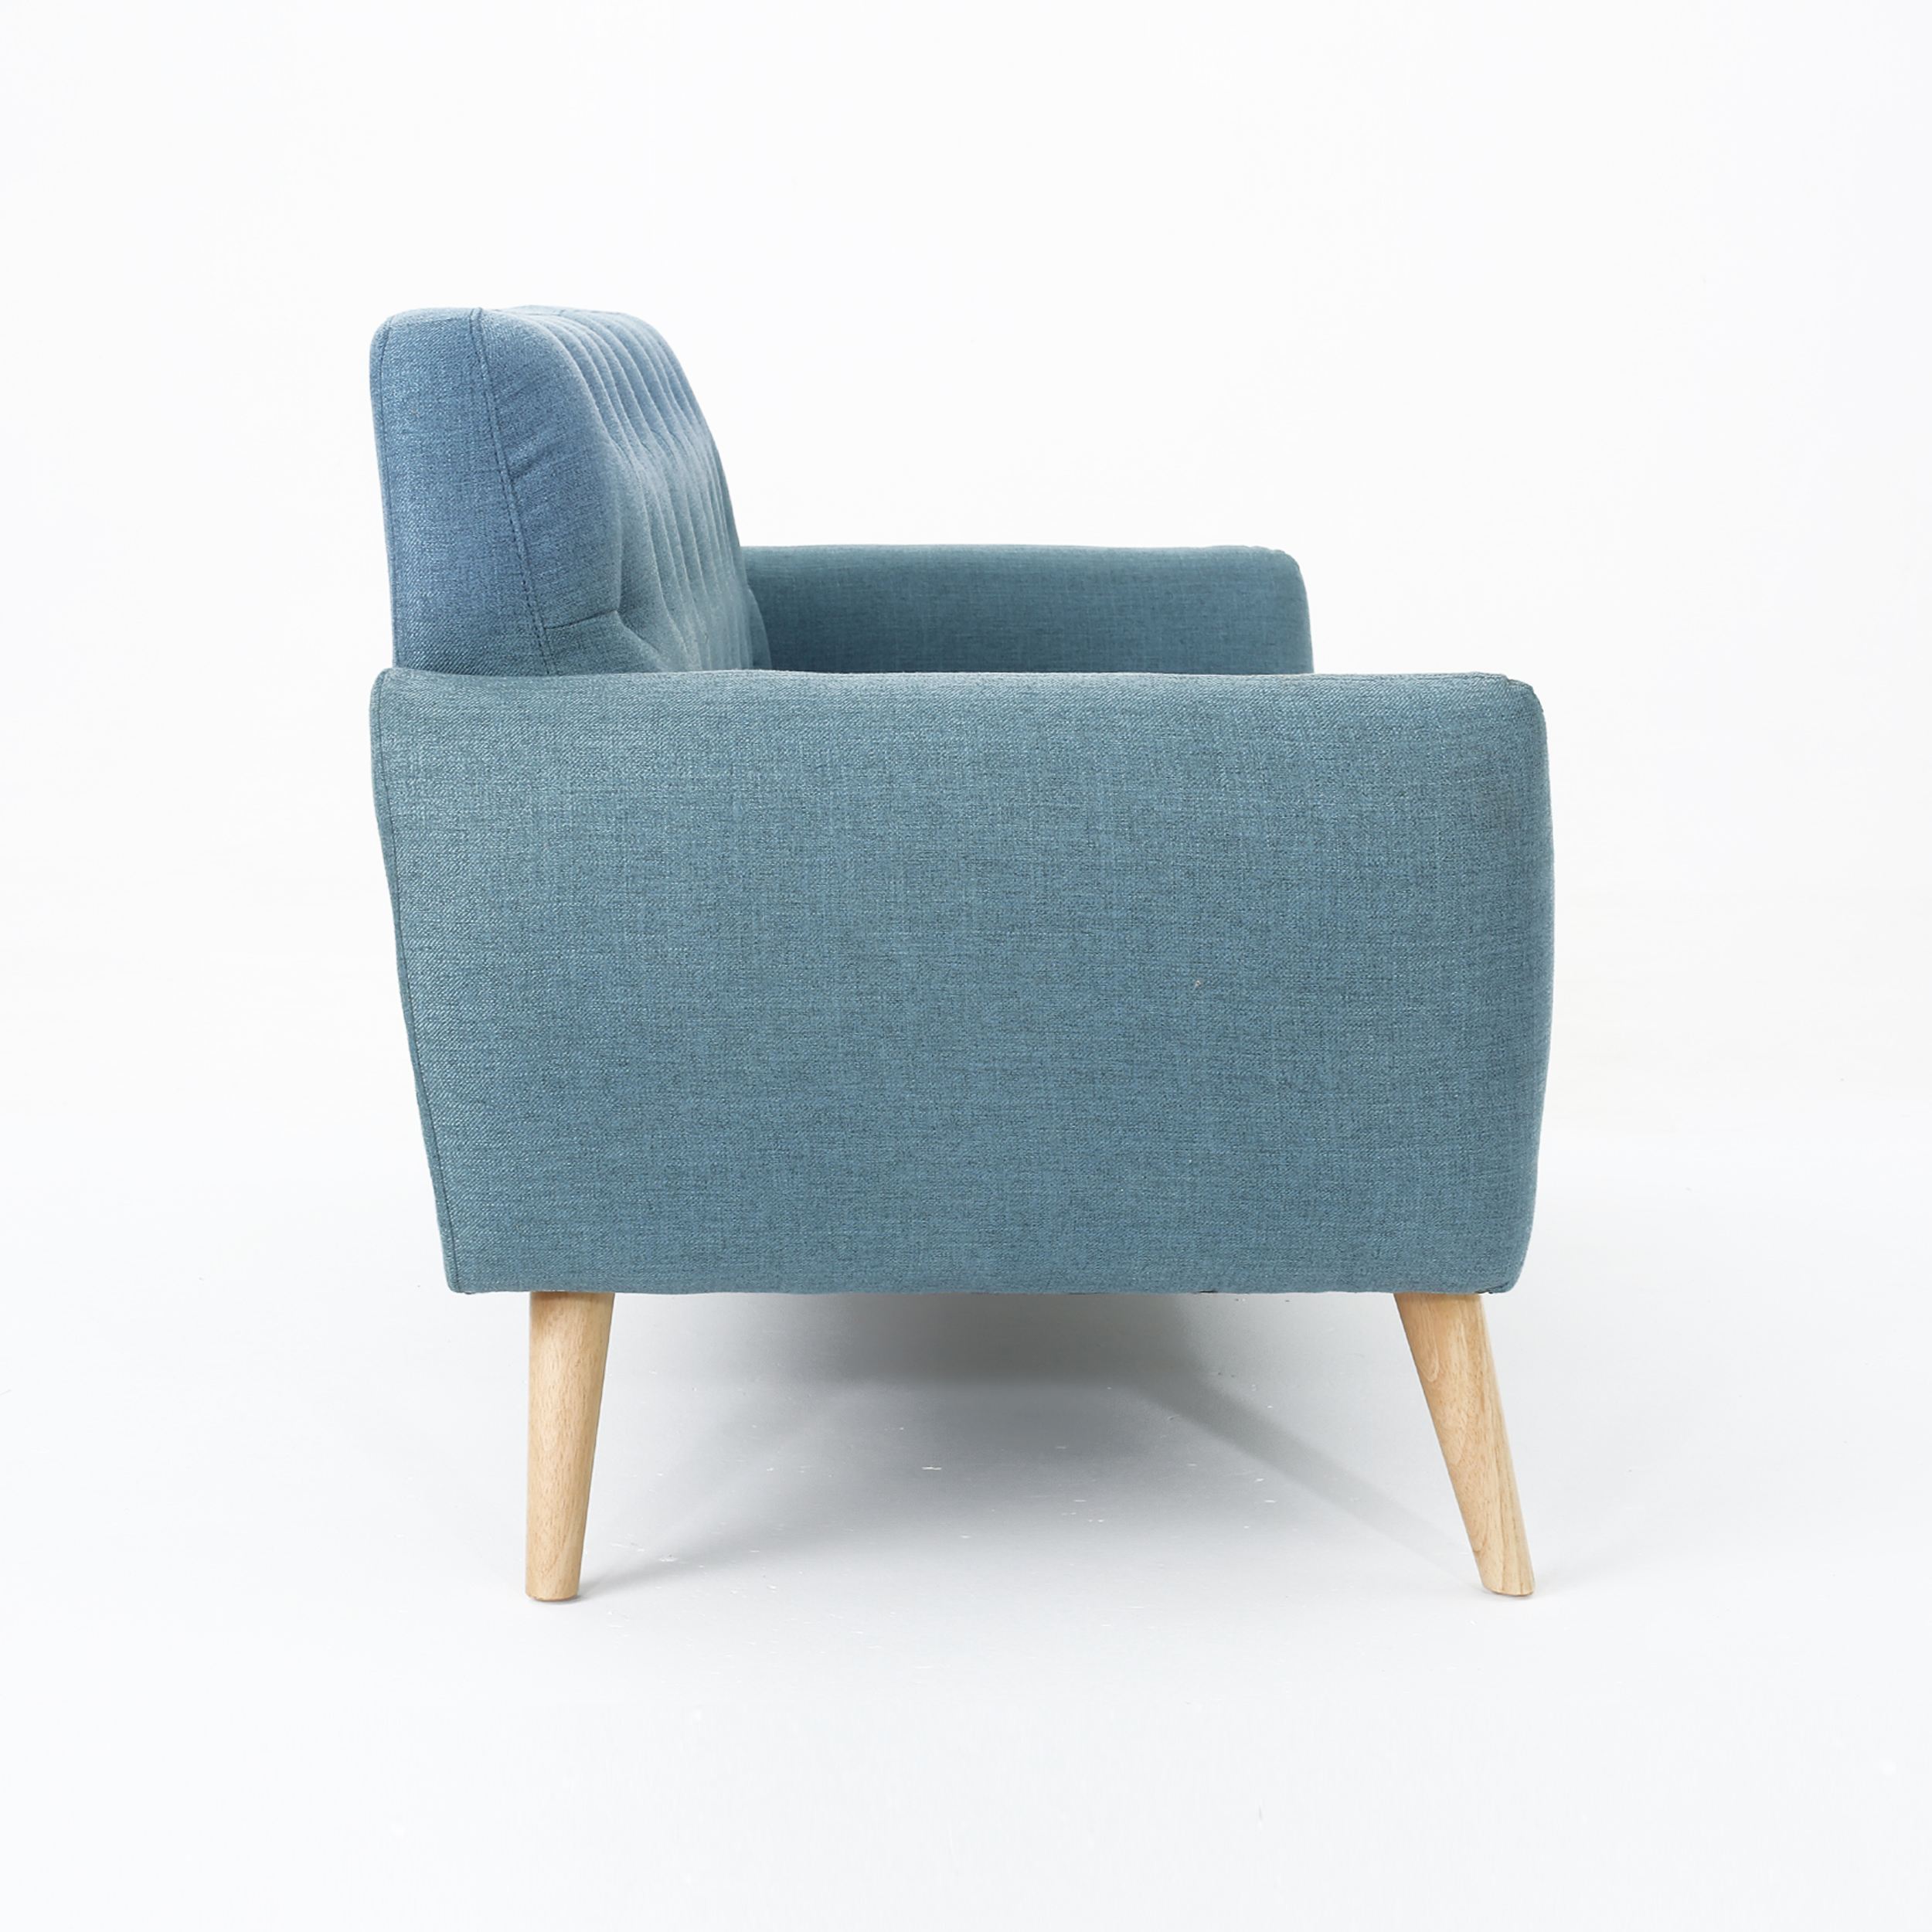 GDF Studio Alscot Mid Century Modern Fabric Tufted Oversized Loveseat, Blue and Natural - image 4 of 8